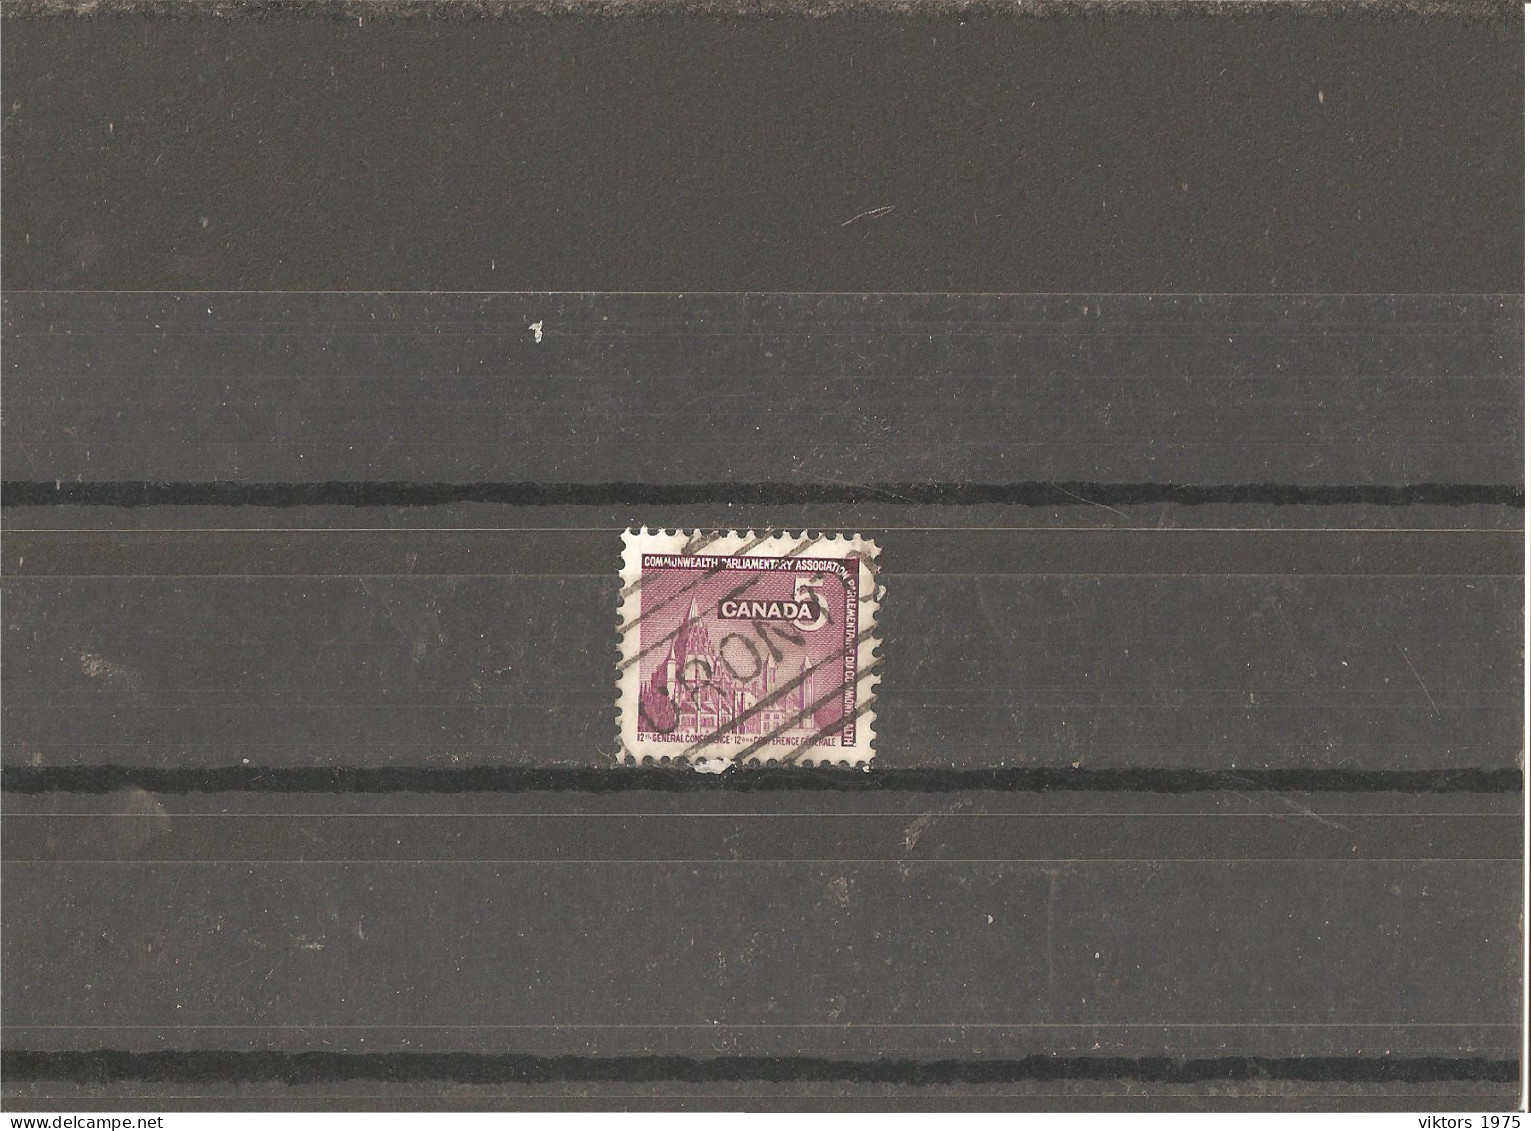 Used Stamp Nr.509 In Darnell Catalog  - Used Stamps